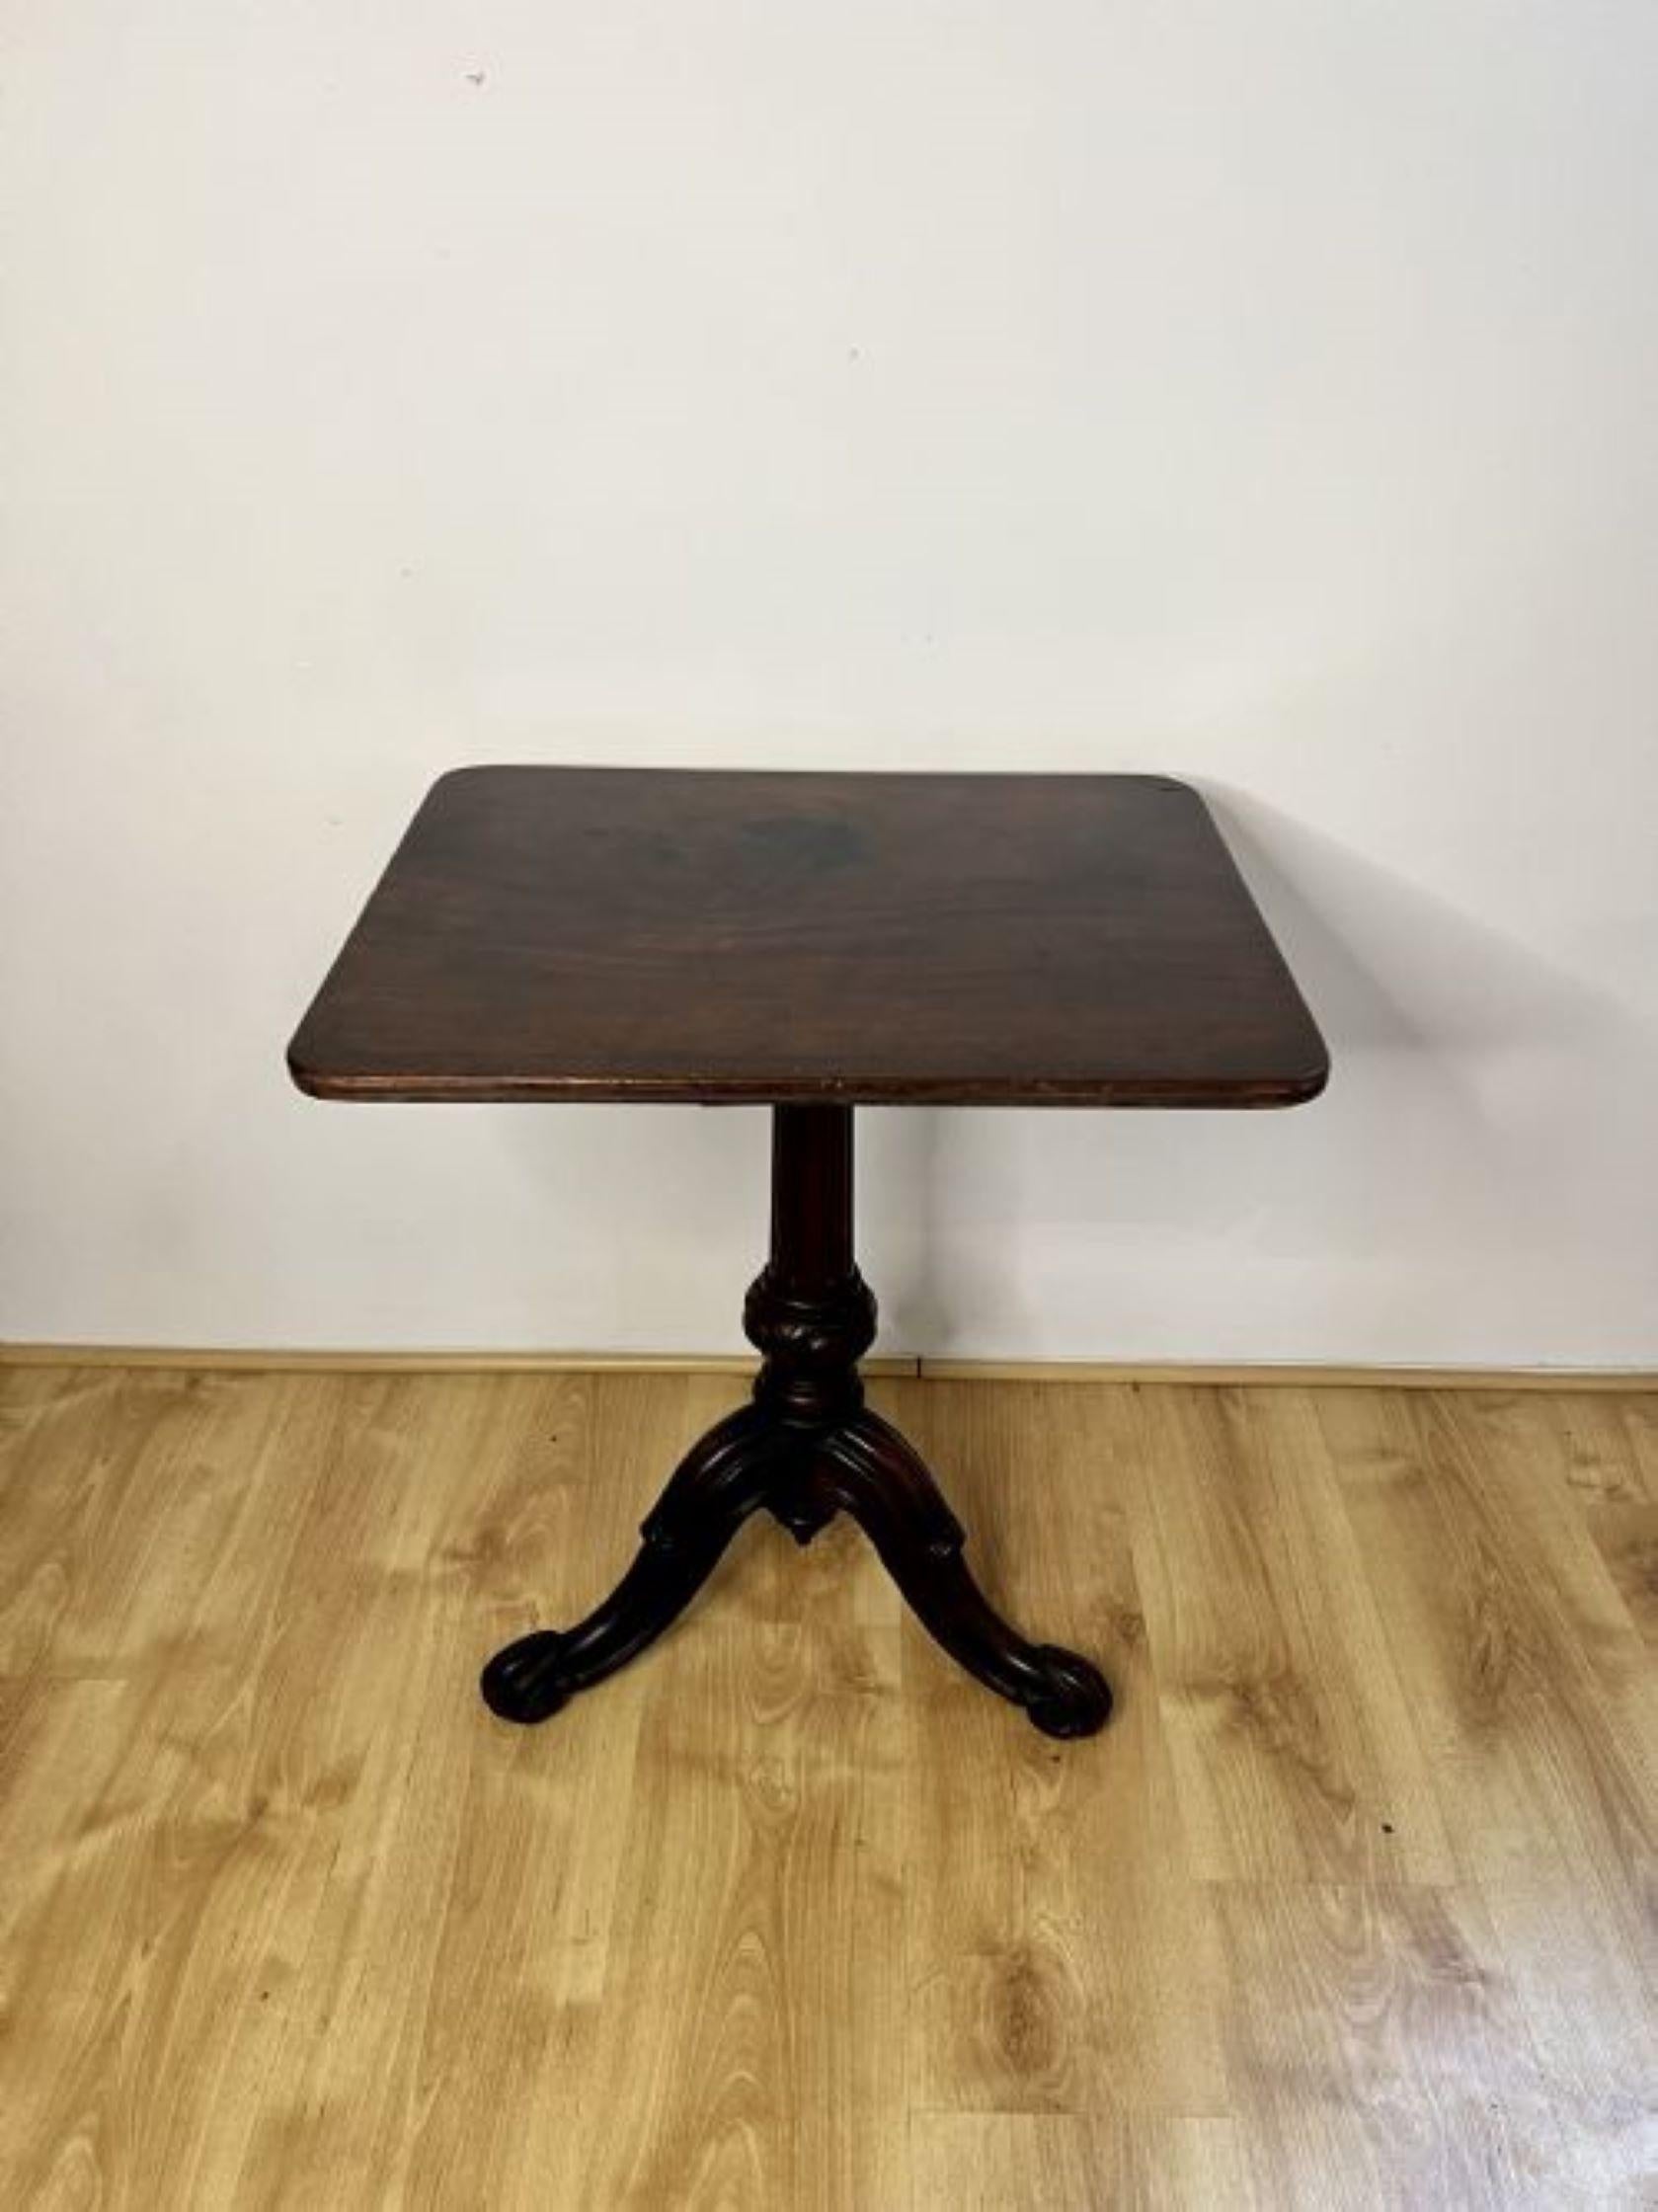 Antique Victorian quality mahogany square top lamp table having a quality mahogany square top supported by a reeded carved tapering pedestal column standing on three carved cabriole legs with scroll feet.